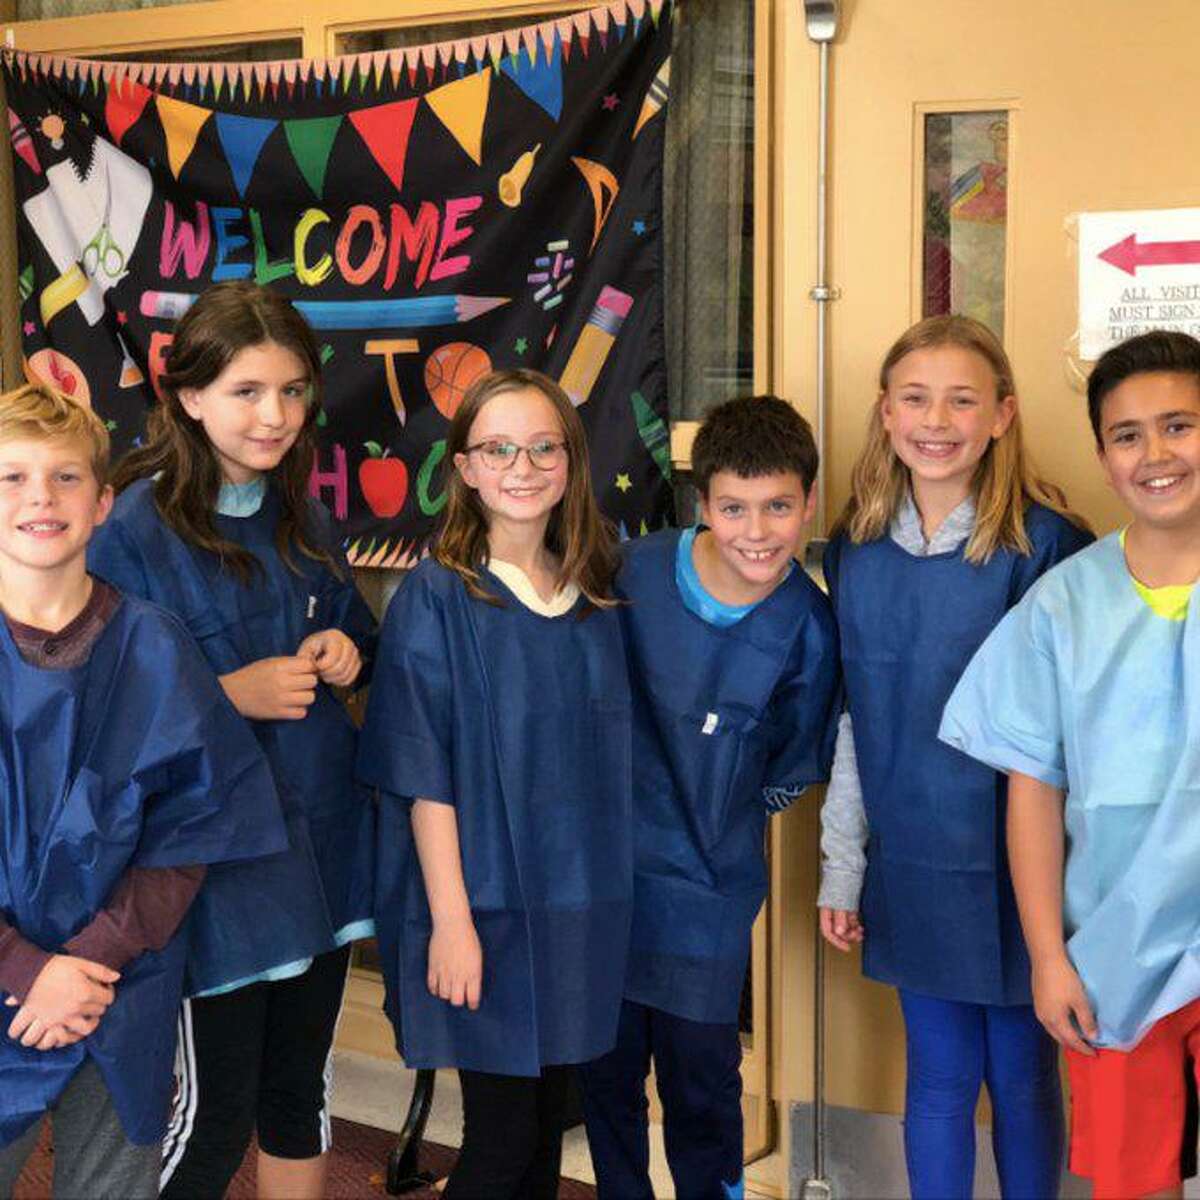 Scotland Elementary fifth graders organized and ran the Little Doctors Blood Drive in November, where they collected 67 pints of blood. Scotland was the first school in Connecticut to participate in this program six years ago. To date, students have collected more than 550 pints of blood.